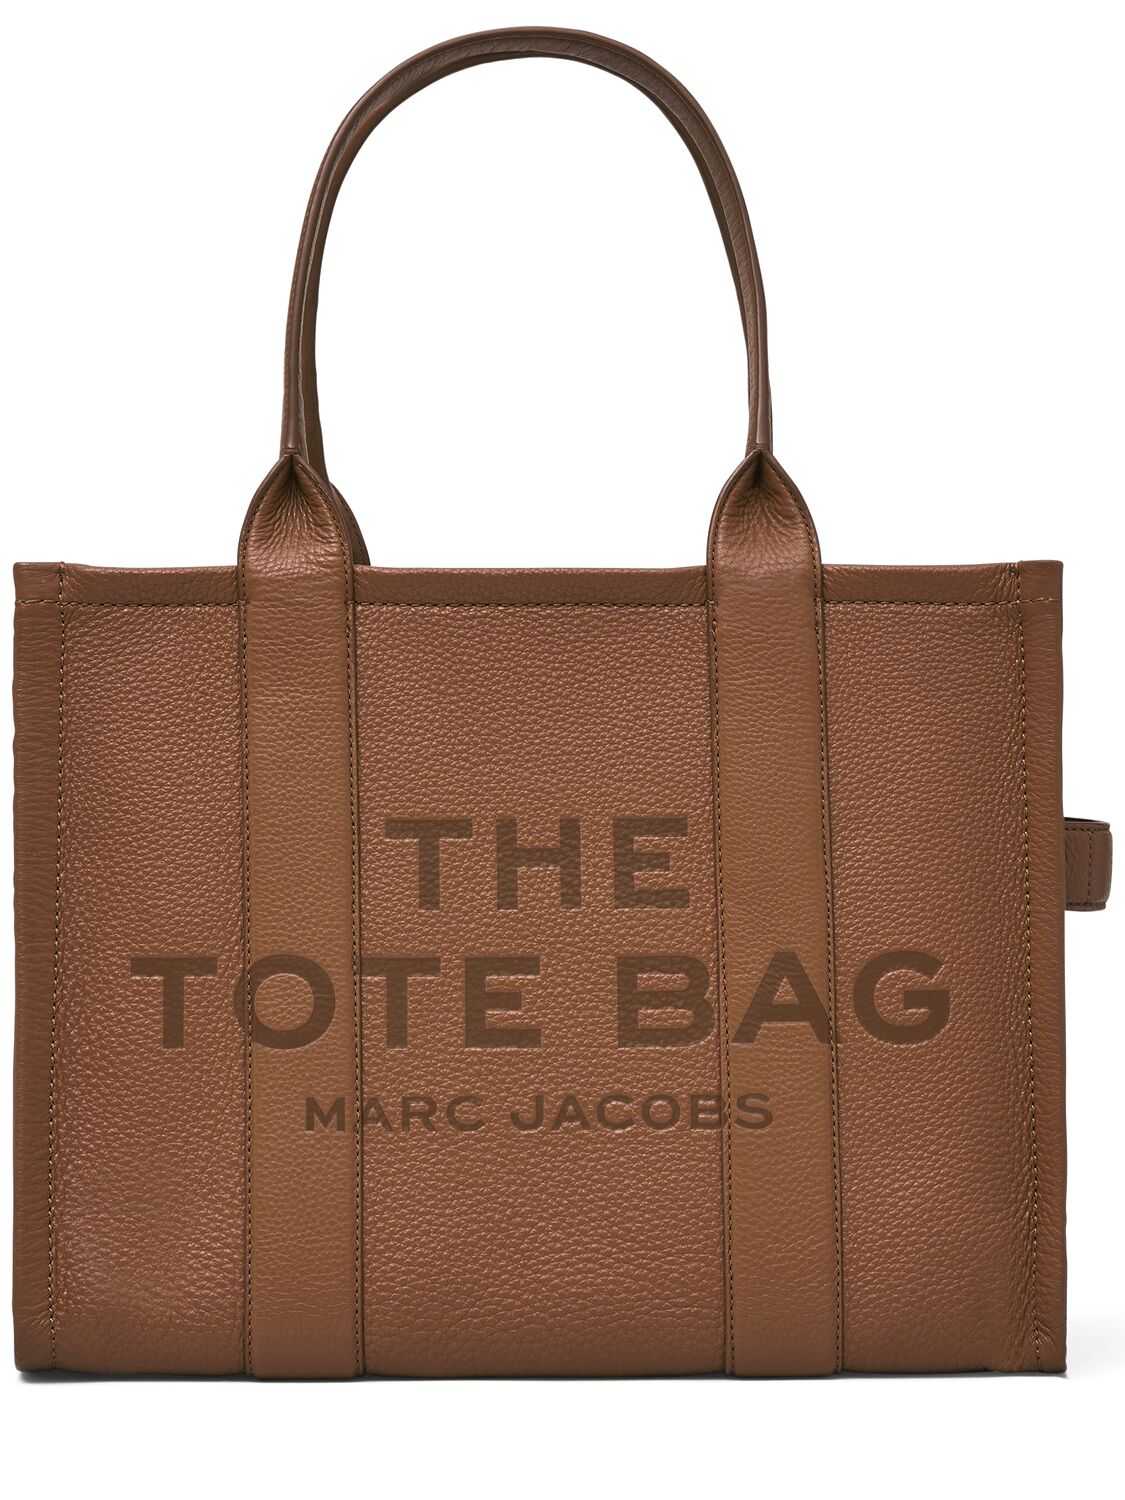 Image of The Large Tote Leather Bag